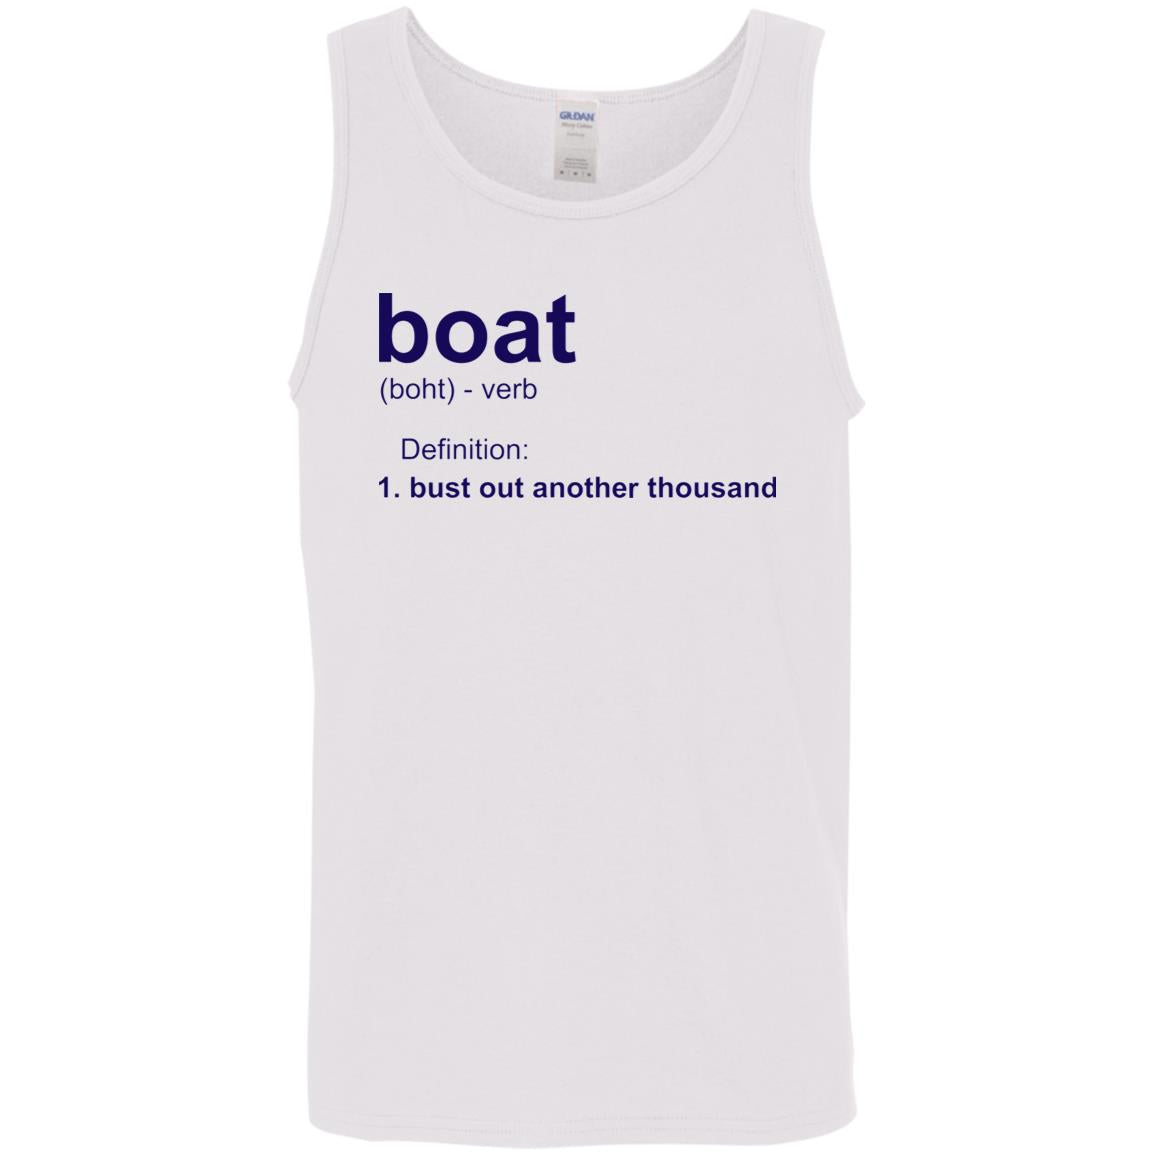 HRCL FL - Navy Boat.... Bust Out Another Thousand - 2 Sided G520 Cotton Tank Top 5.3 oz.